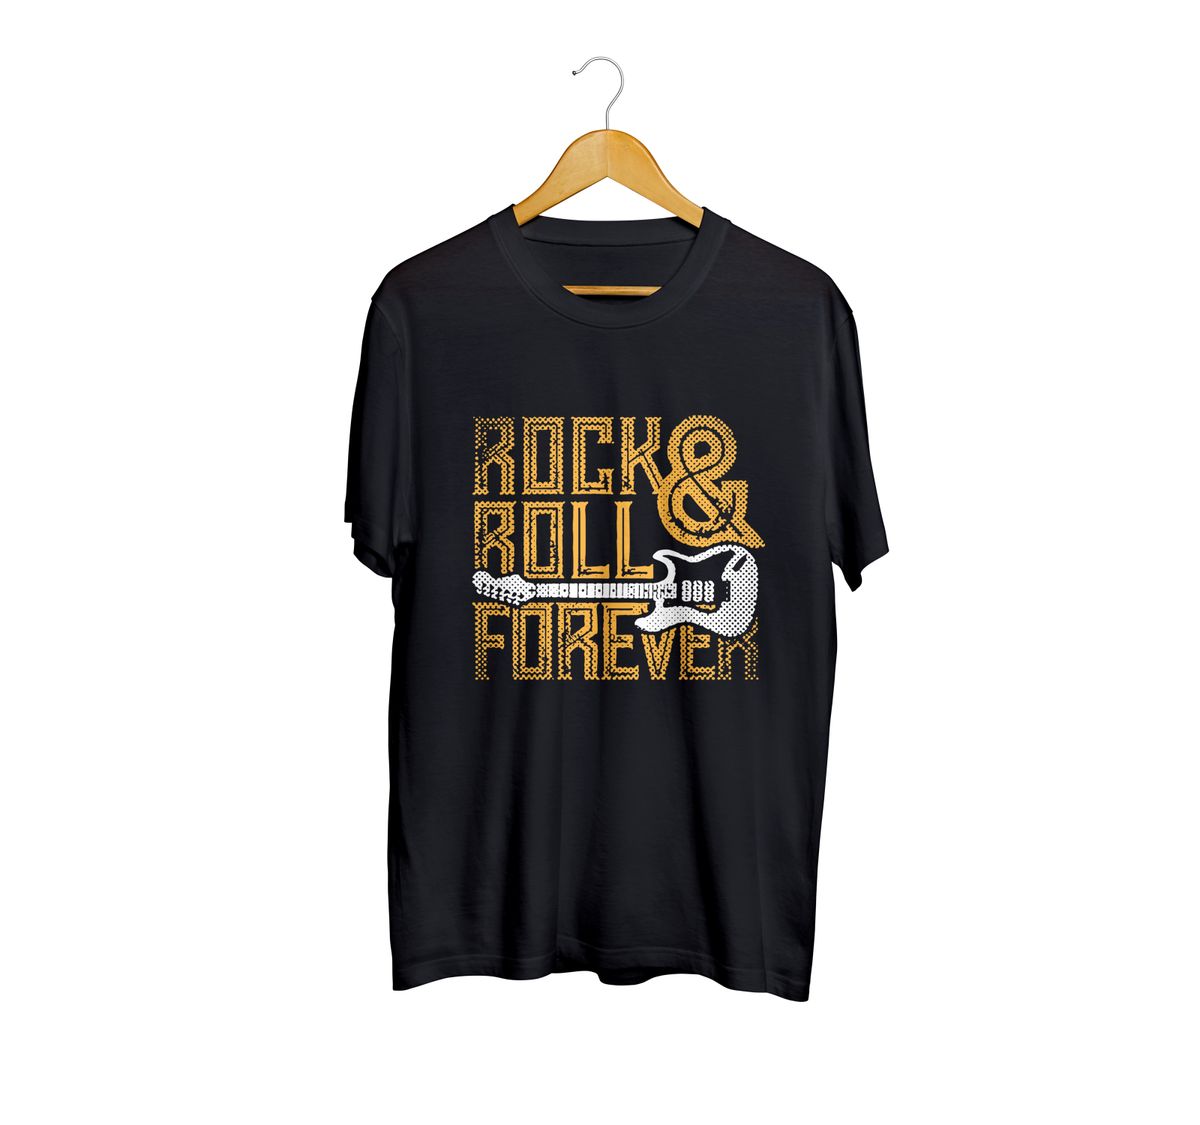 Classic Rock Society Black Forever T-Shirt image 1